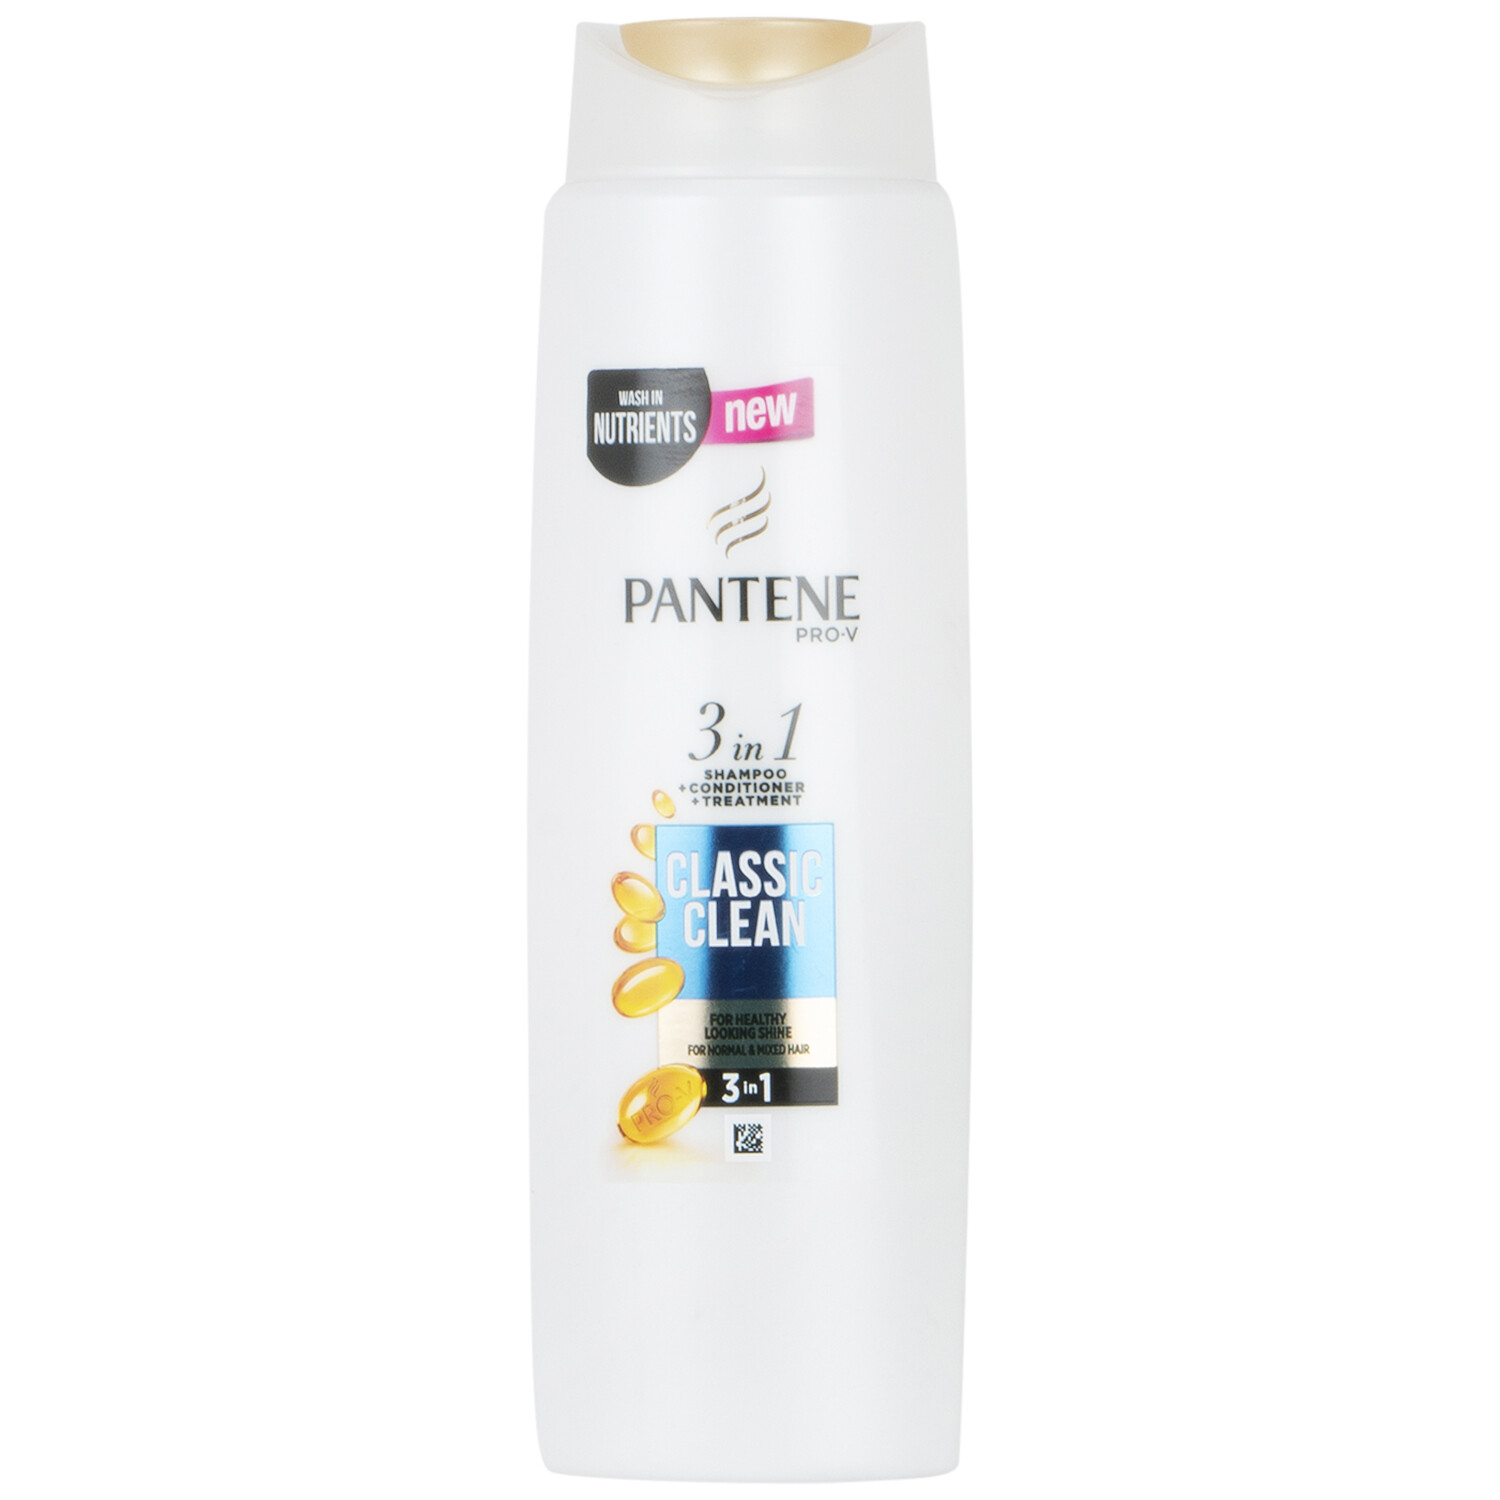 Pantene PRO-V 3-in-1 Classic Clean 300ml Image